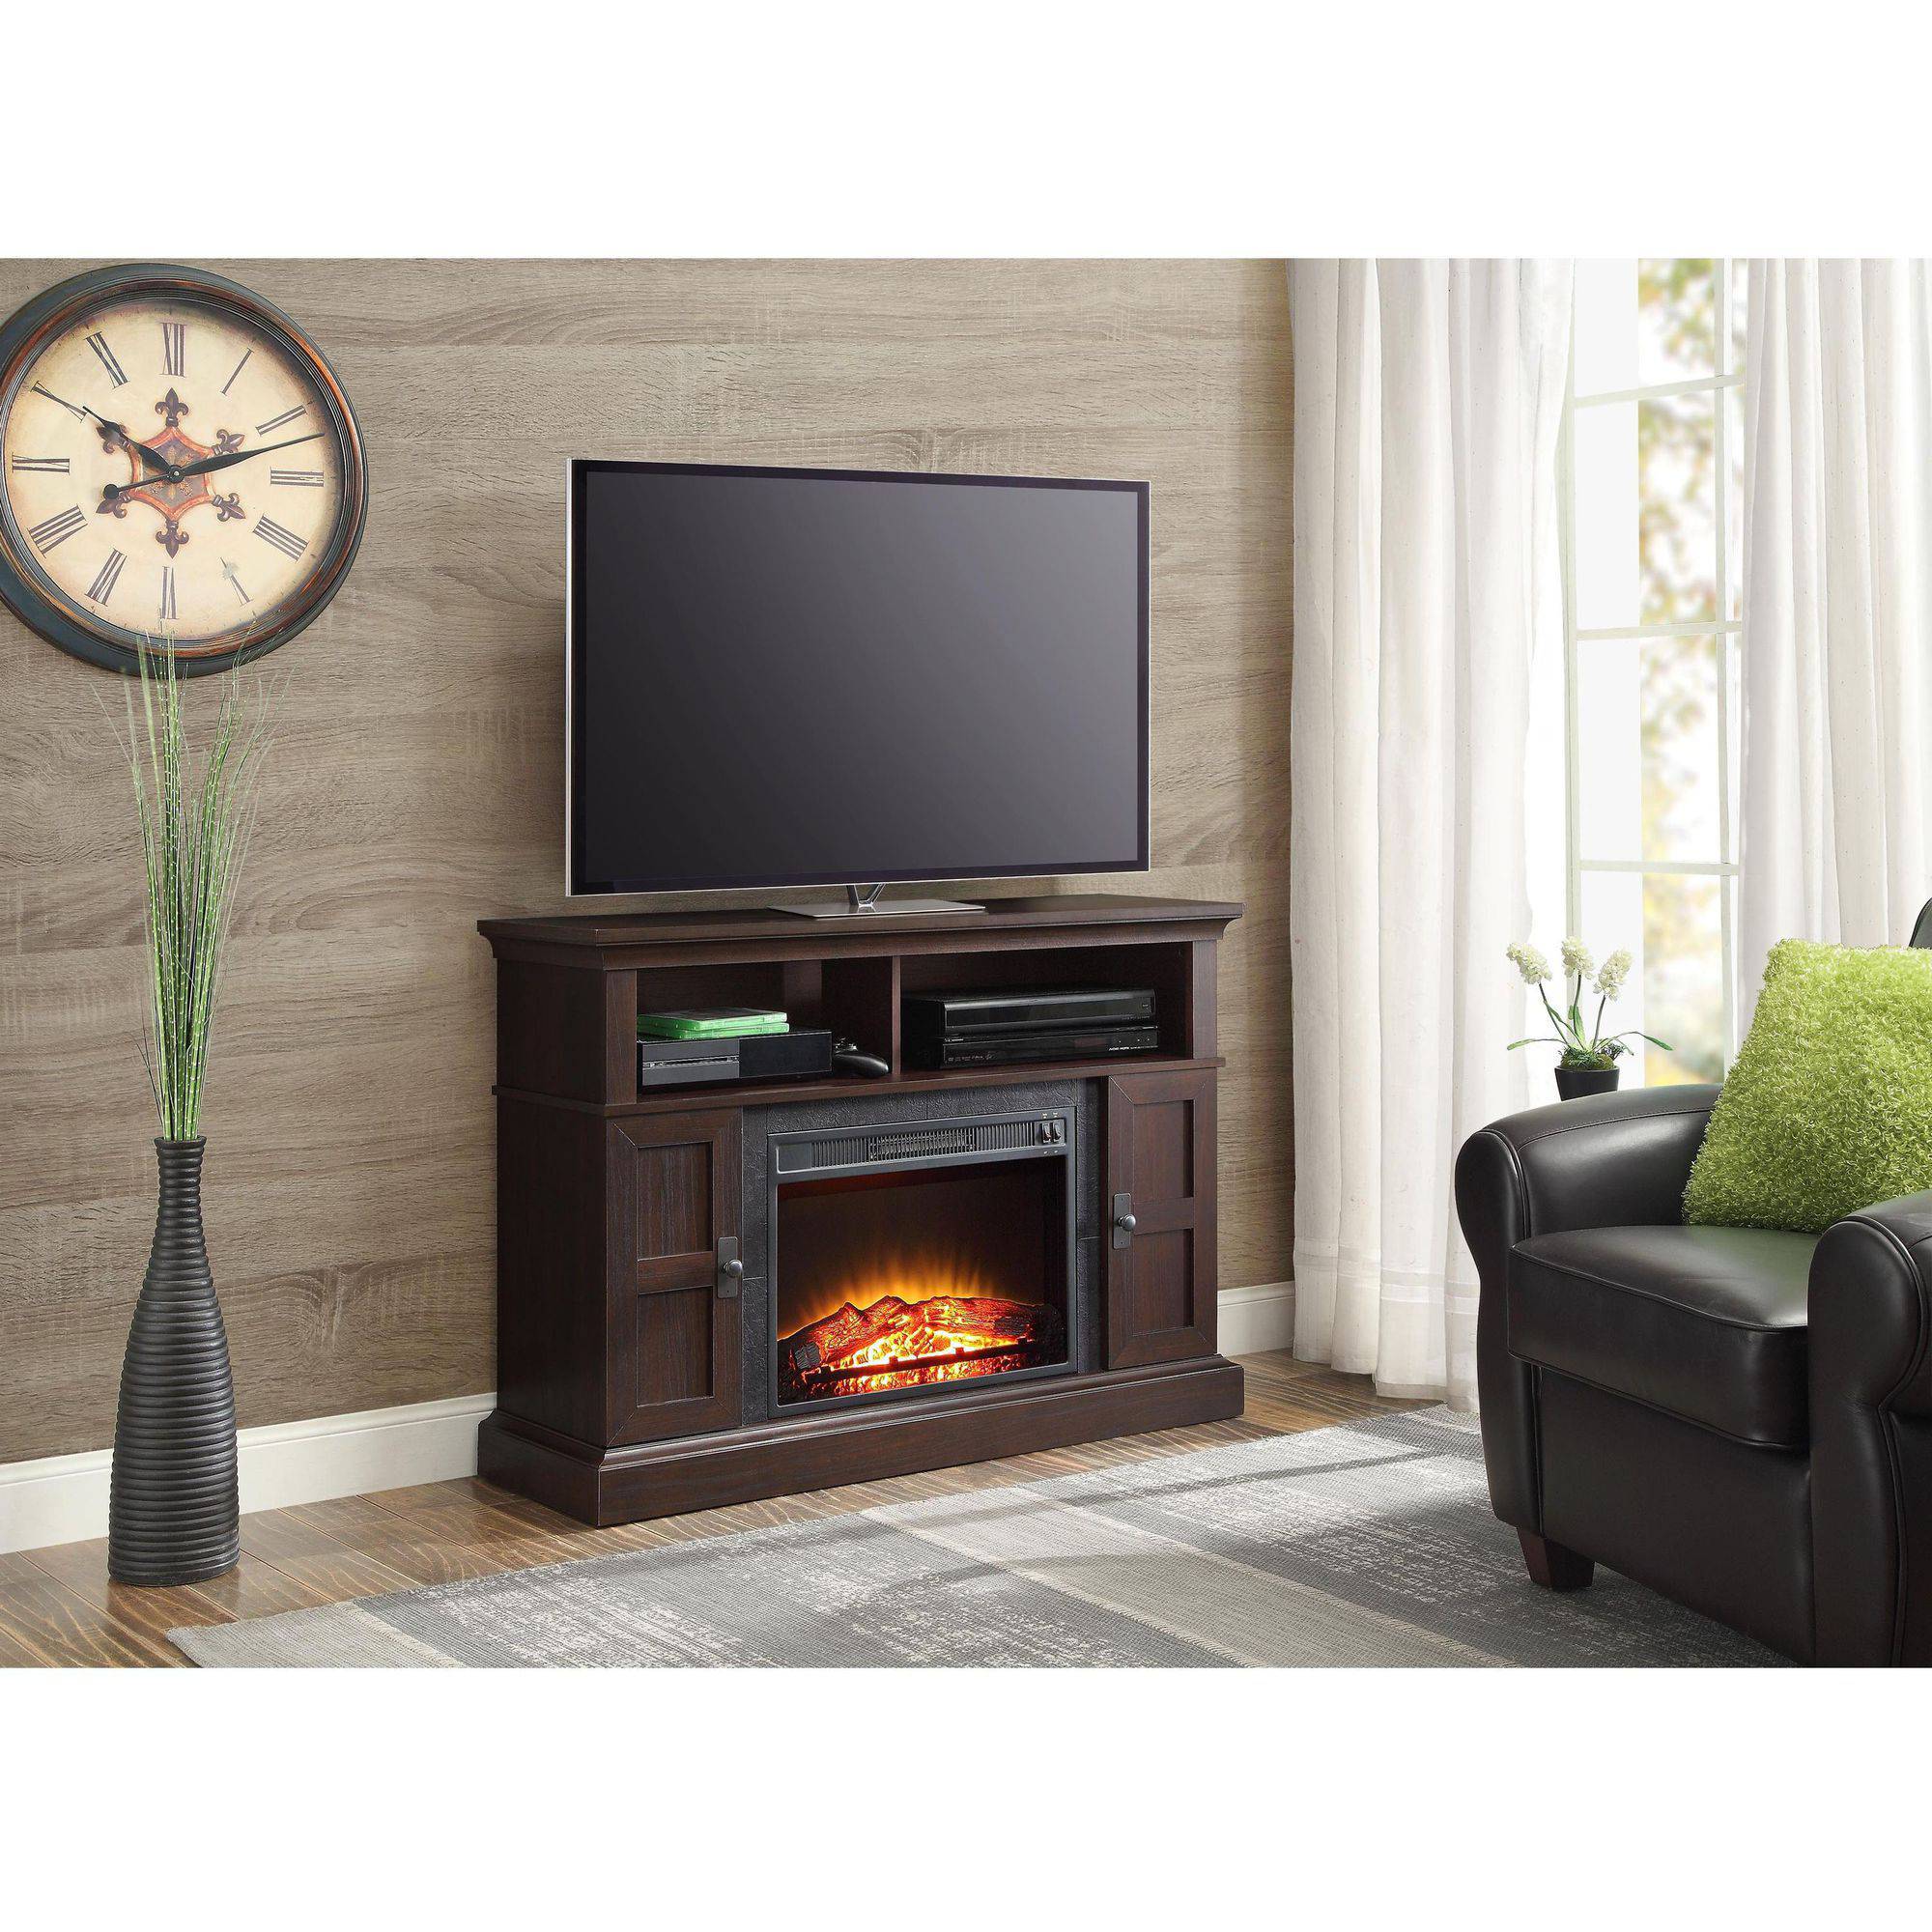 55 Inch Tv Stand with Fireplace Lovely Fireplace Tv Stand for 55 Tv